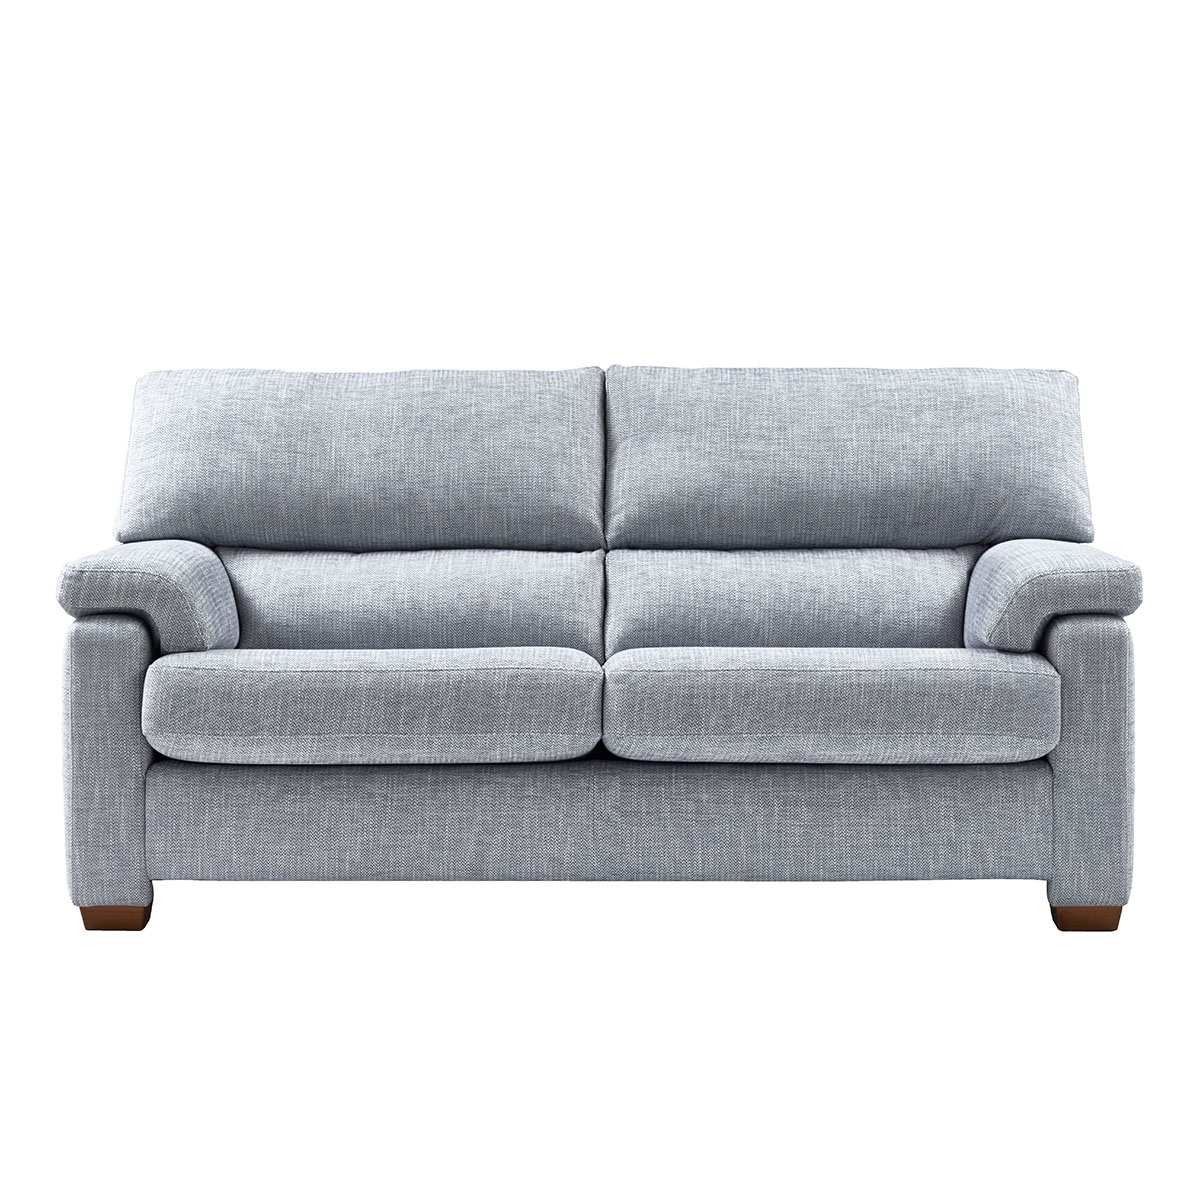 Harrow 3 Seater Sofa Collingwood, How Much Fabric Is Needed For A 3 Seater Sofa